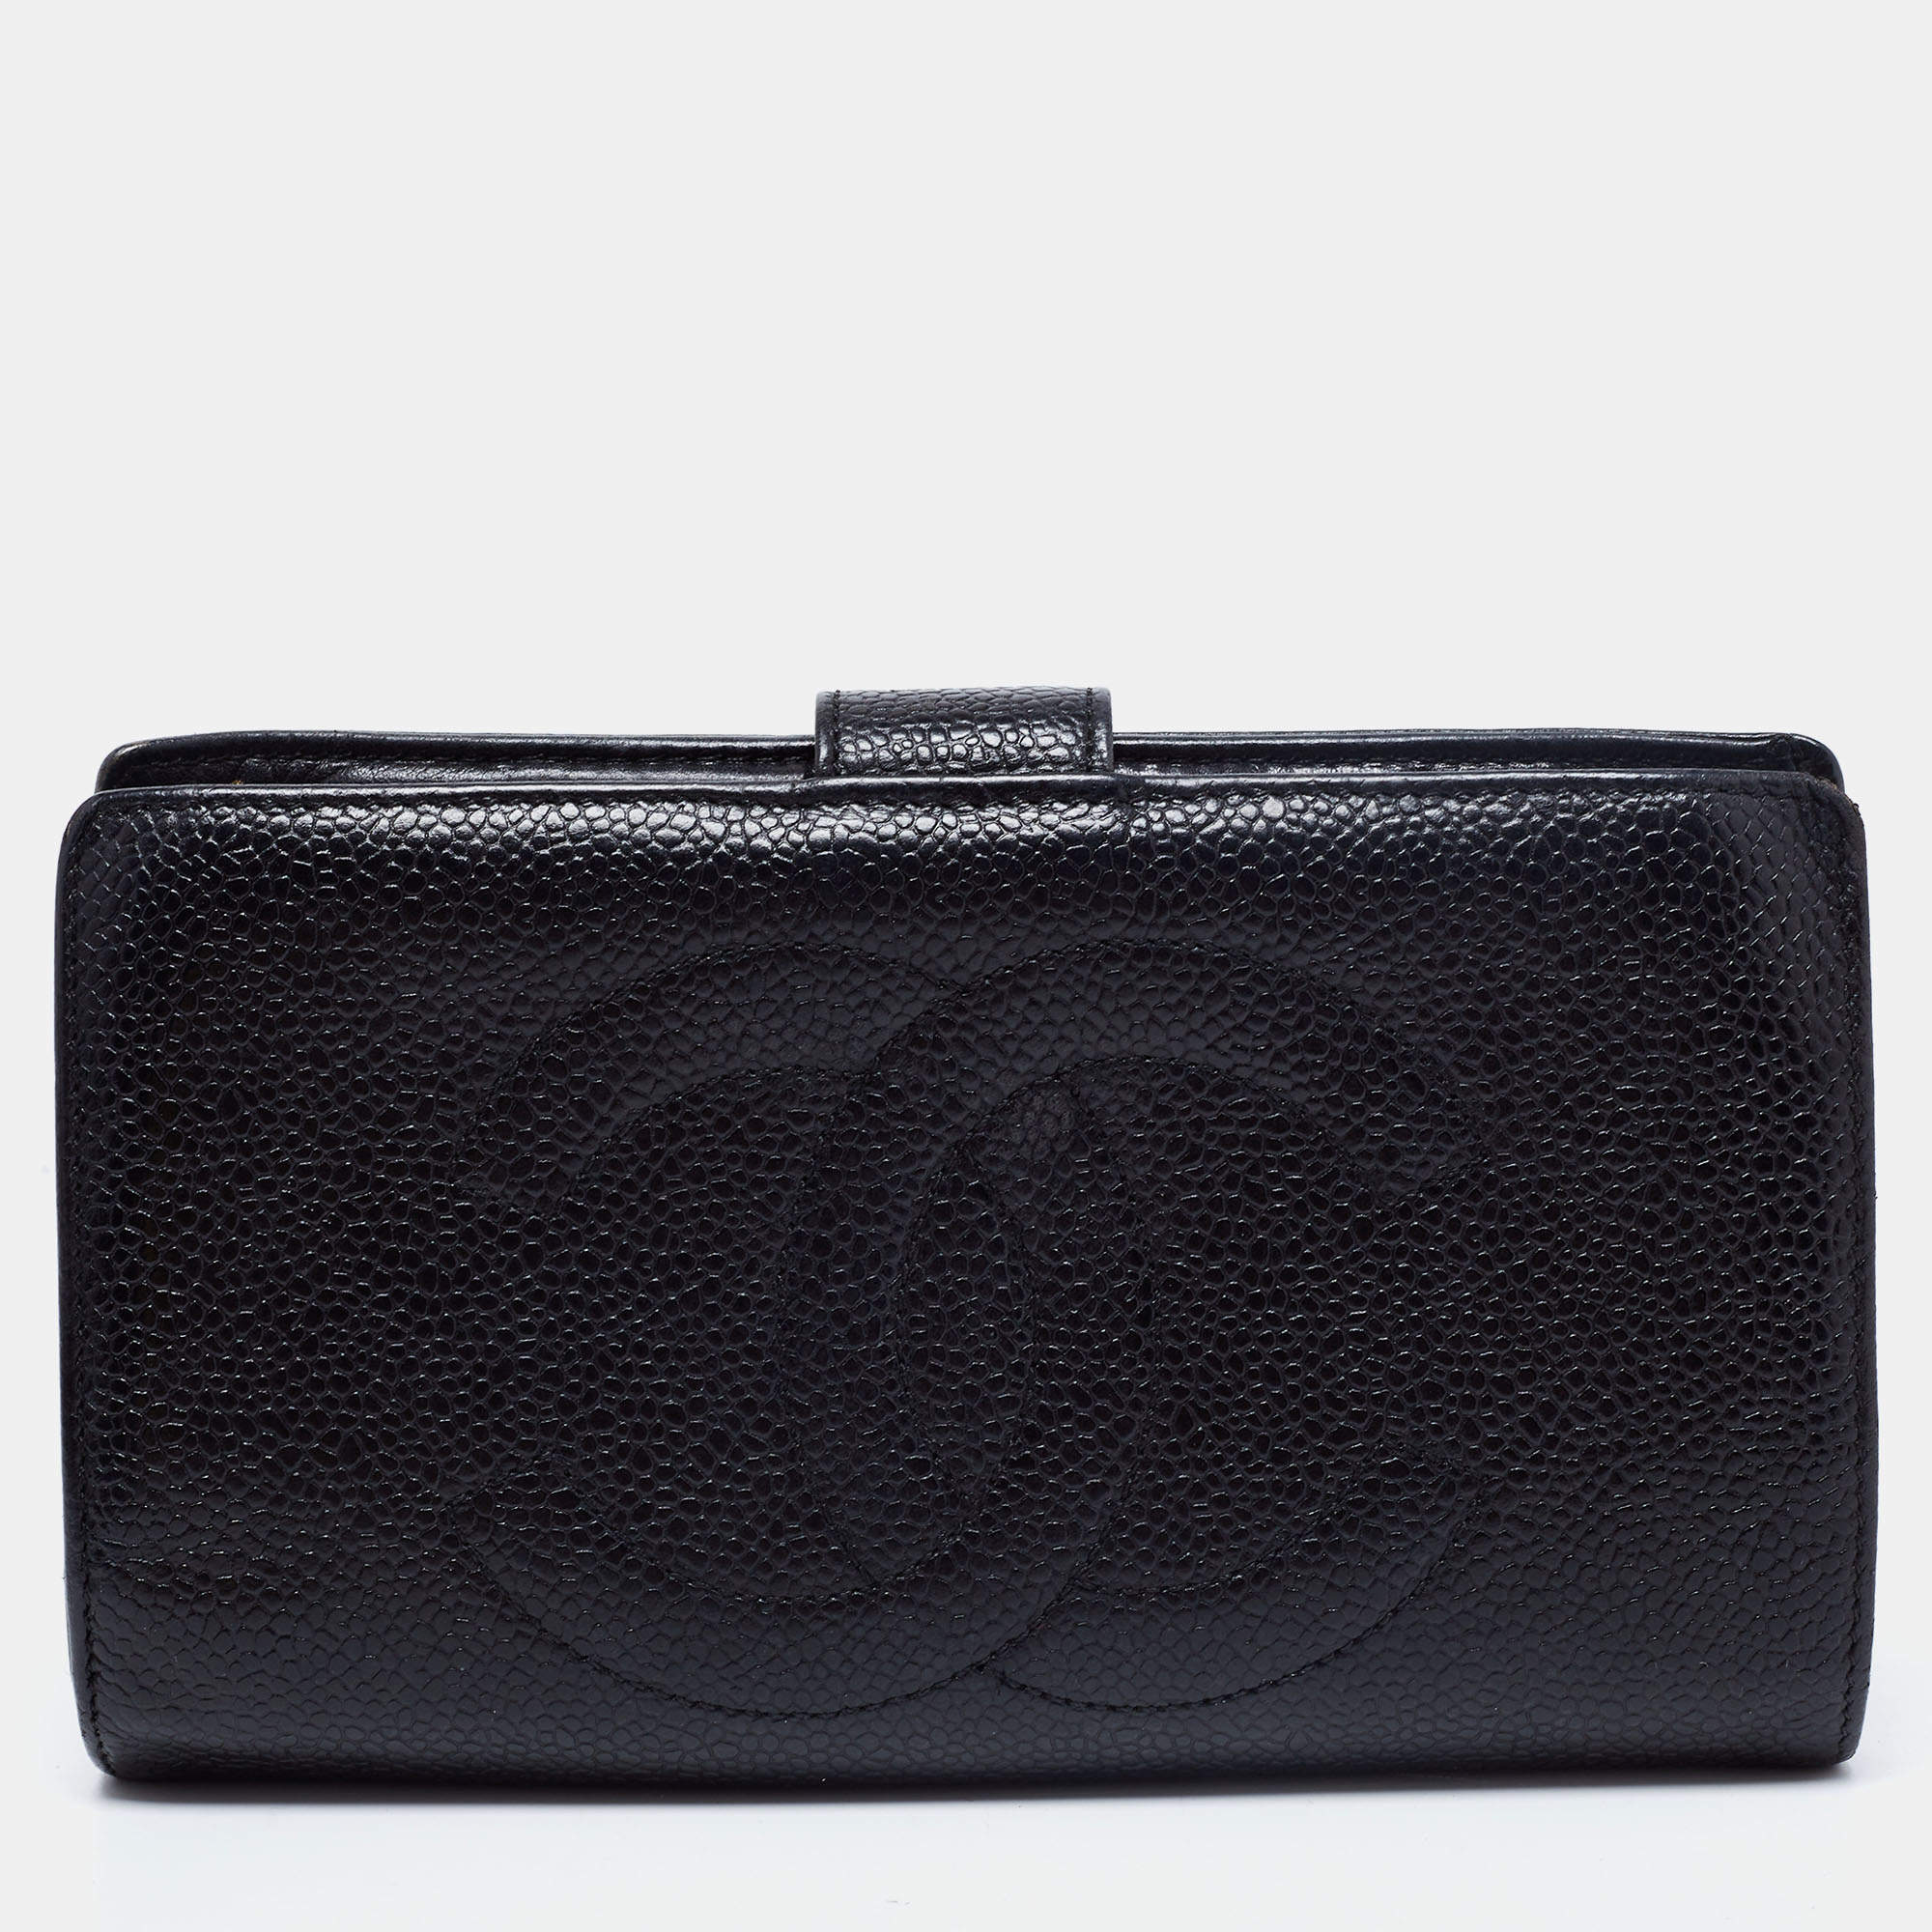 Chanel Black Caviar Leather Vintage Timeless CC French Wallet